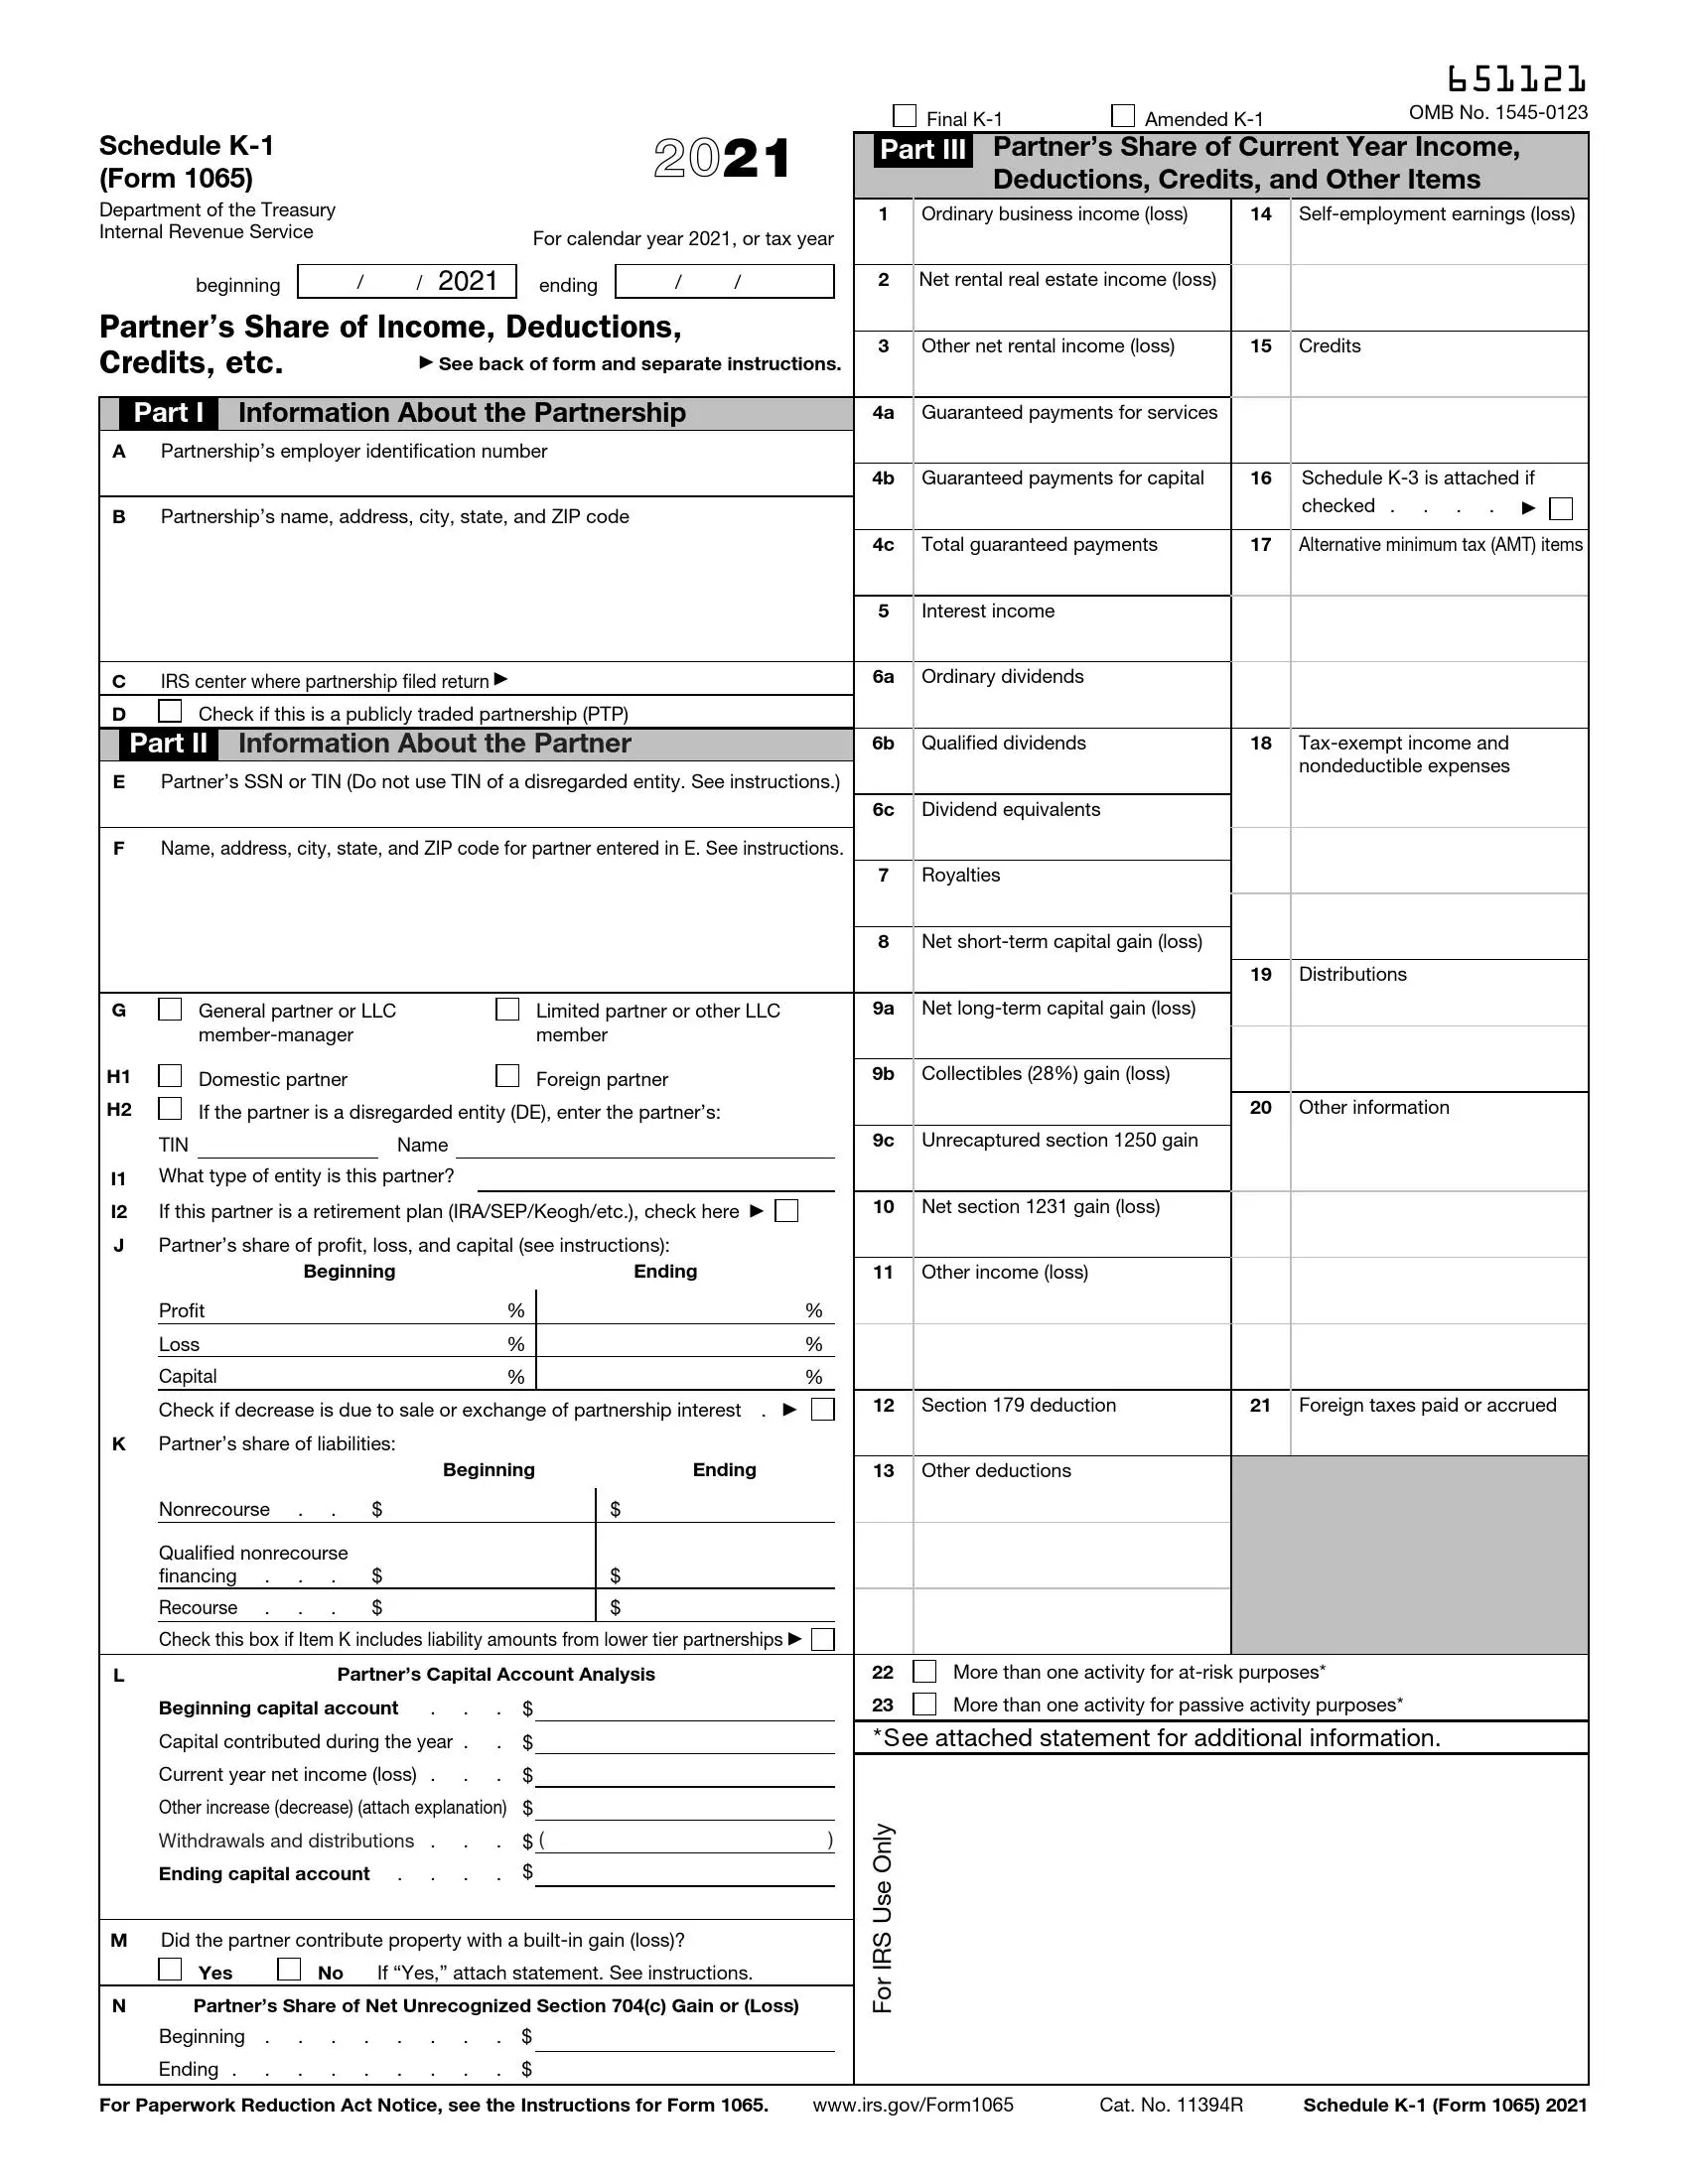 irs schedule k-1 form 1065 2021 preview